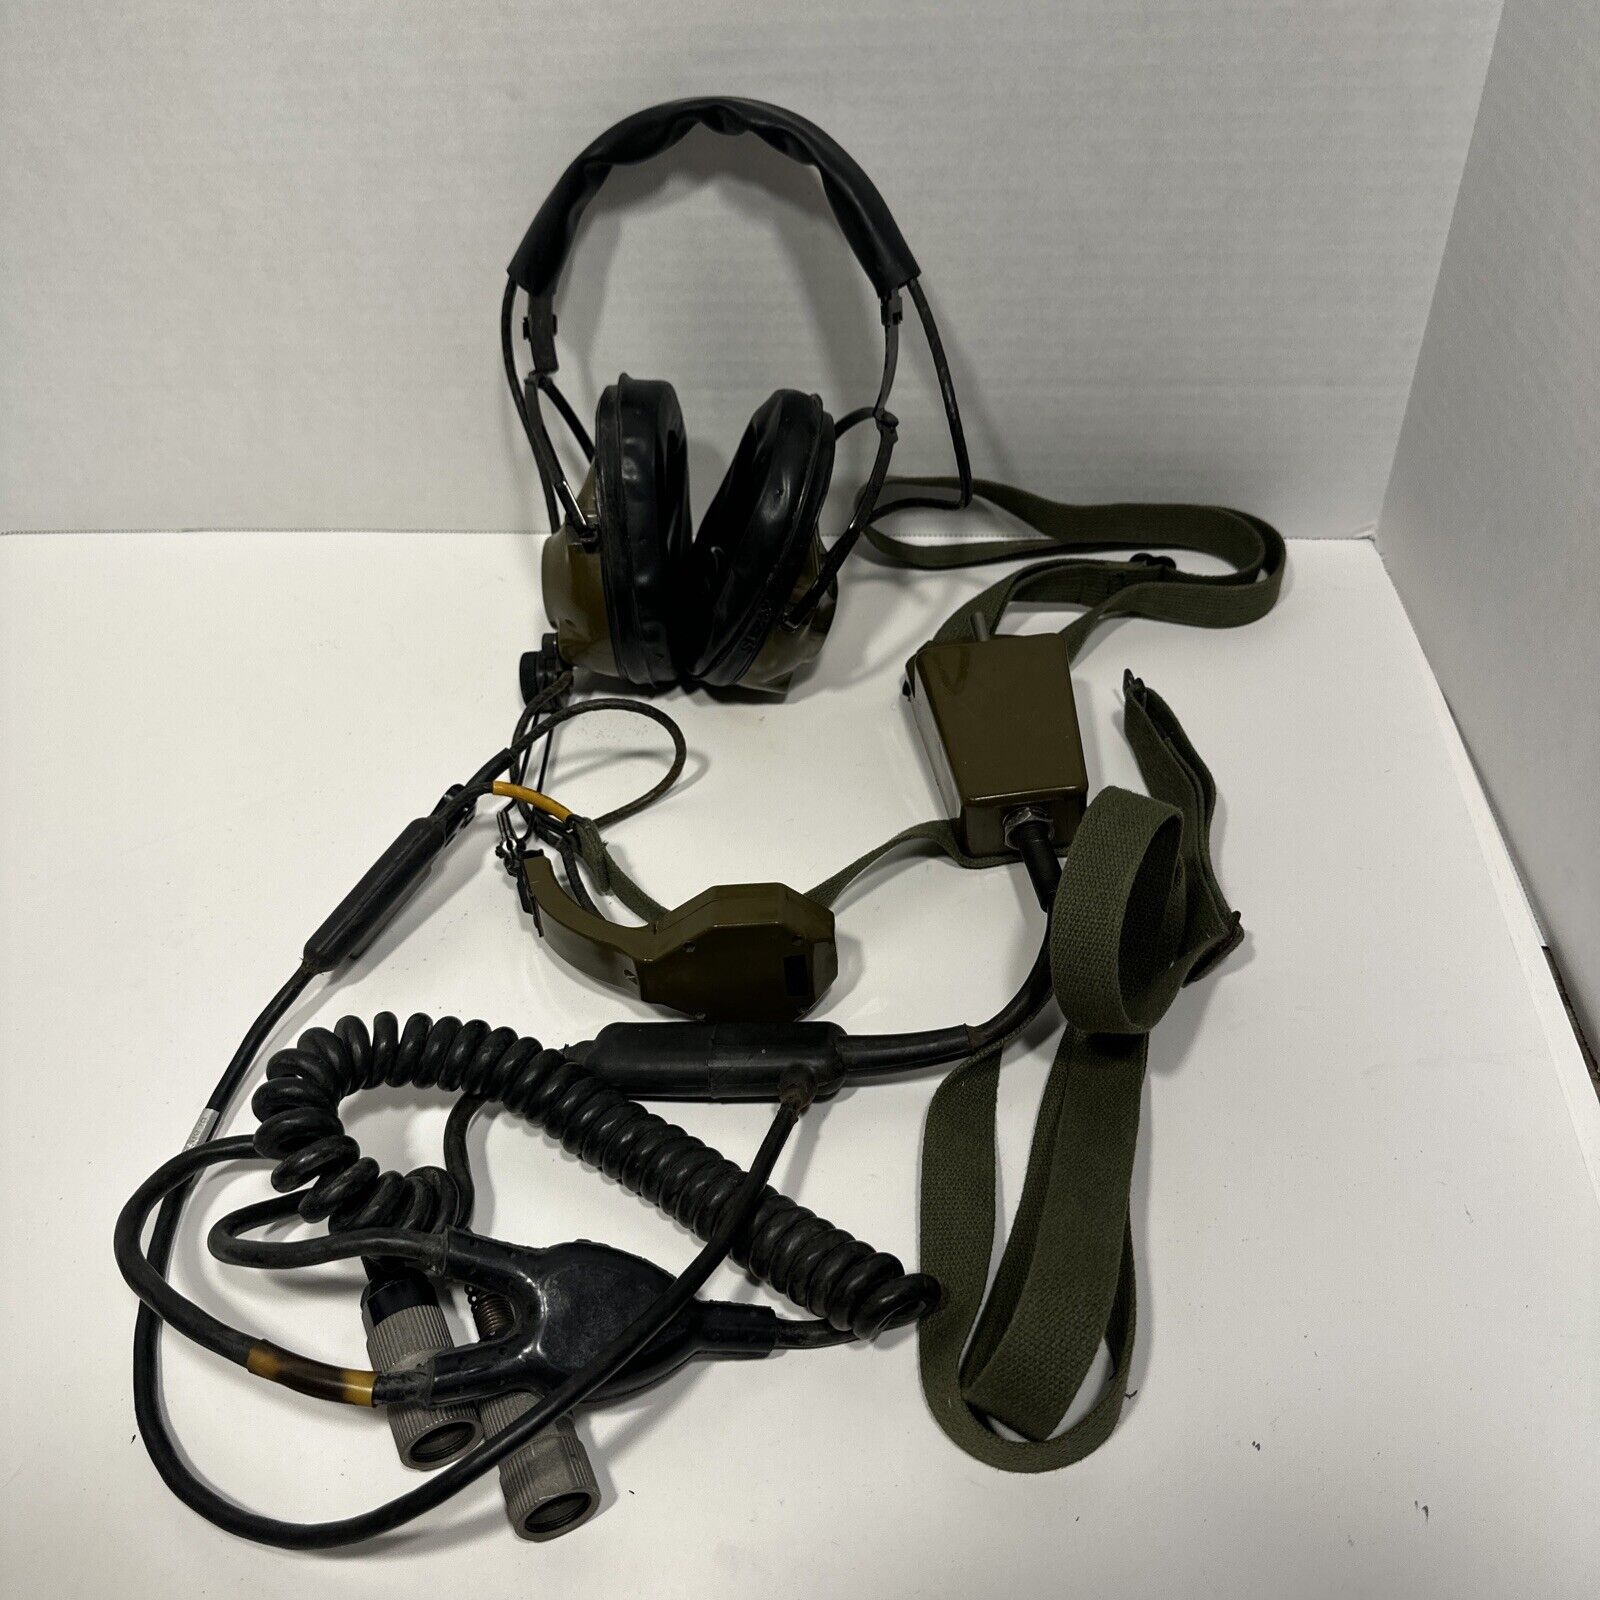 Sonetronics Military Noise Cancelling Headset & Mic S1242-22   PARTS ONLY